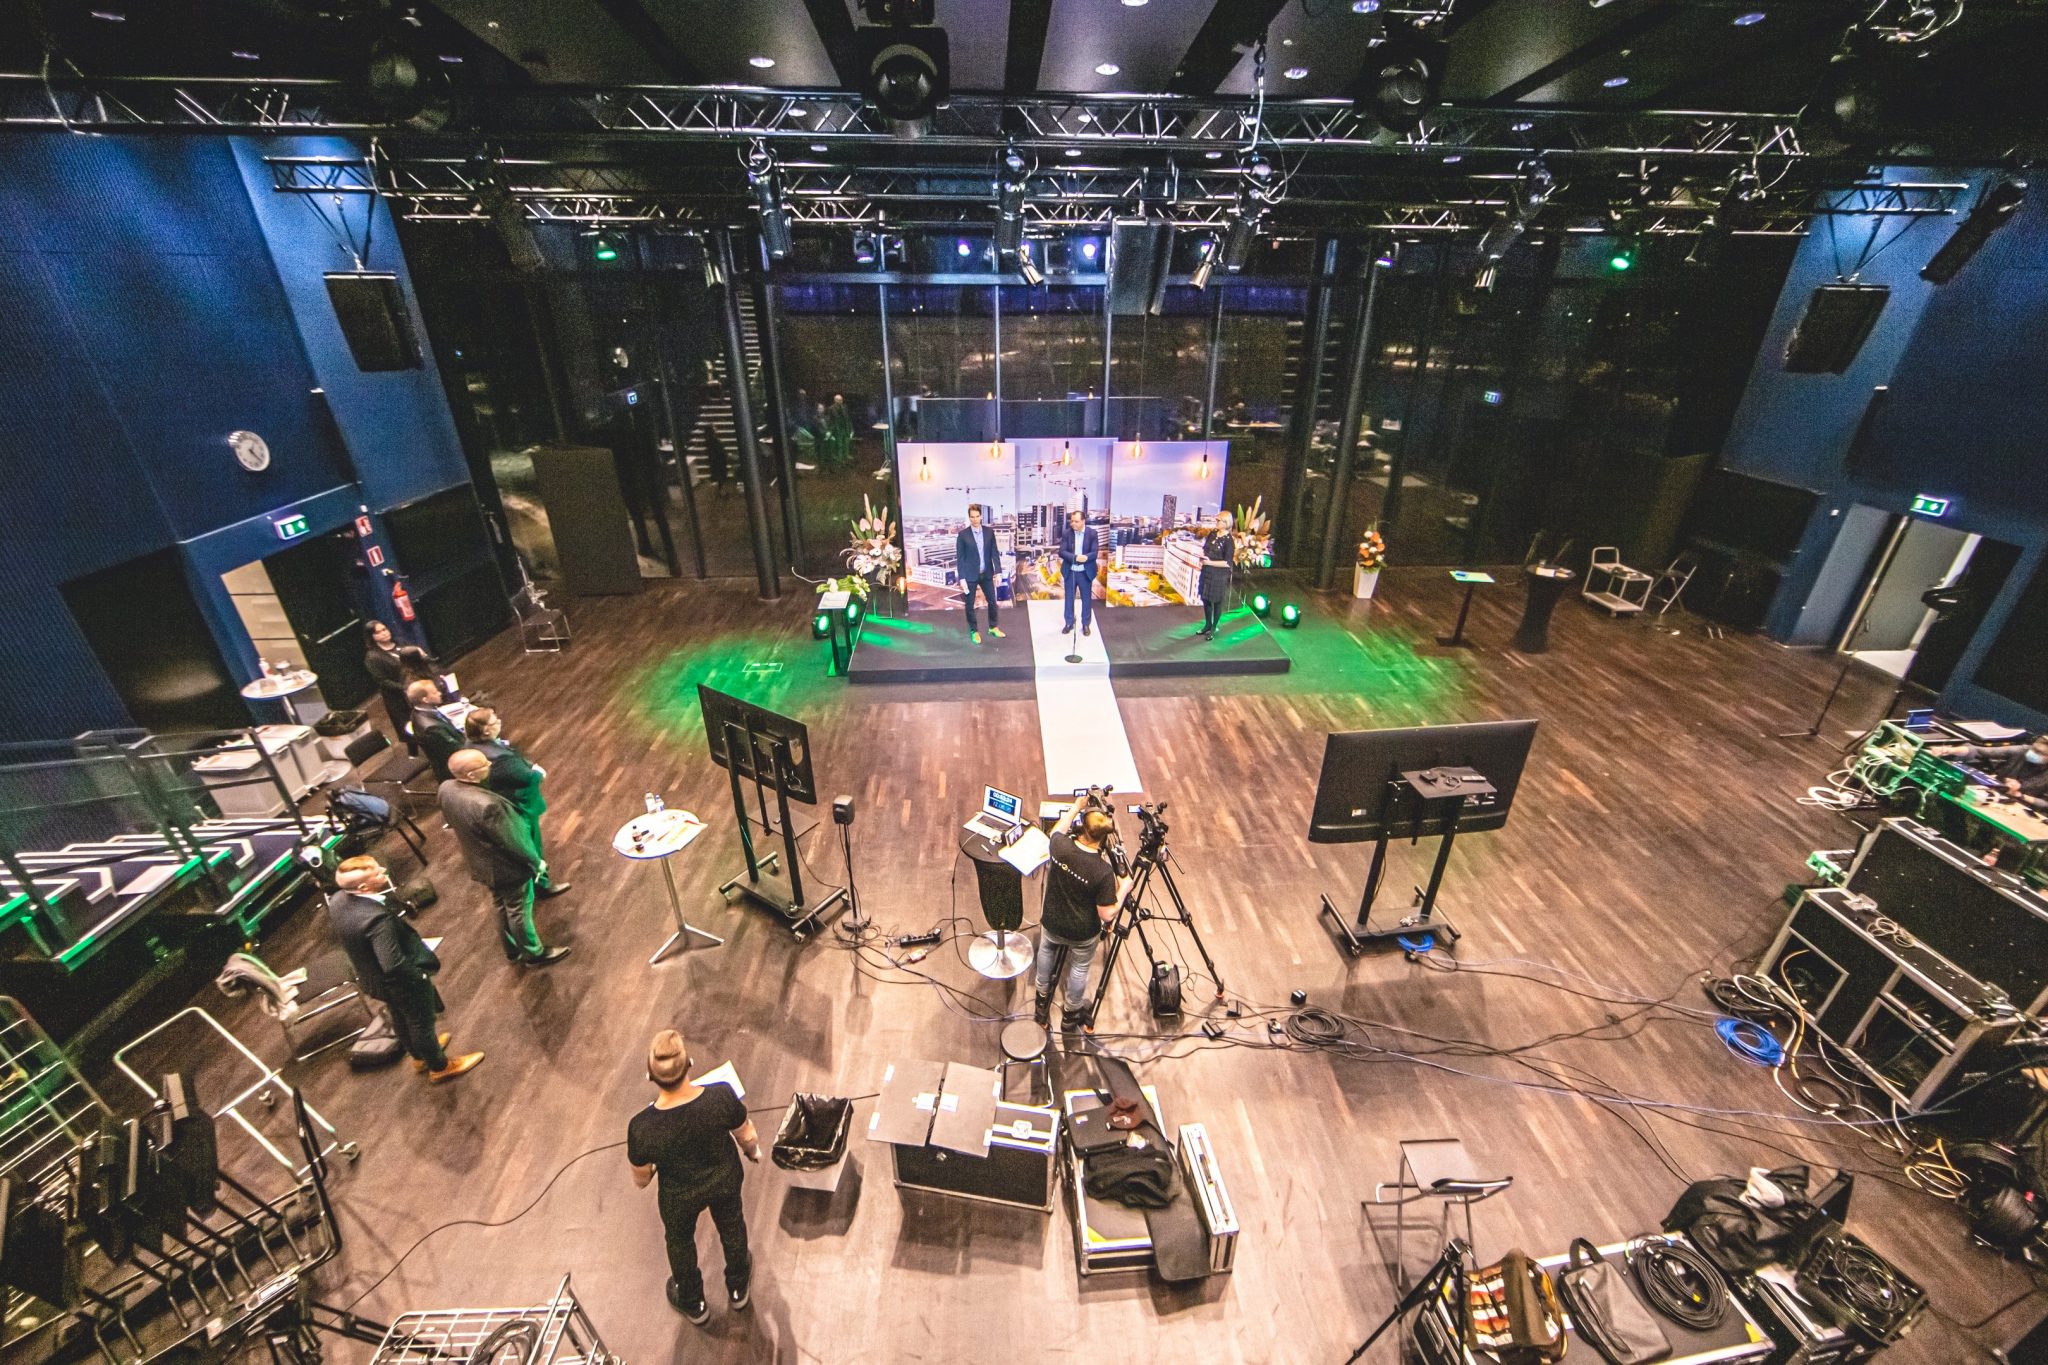 Birds eye view of people standing on a stage and film crew behind cameras and screens.